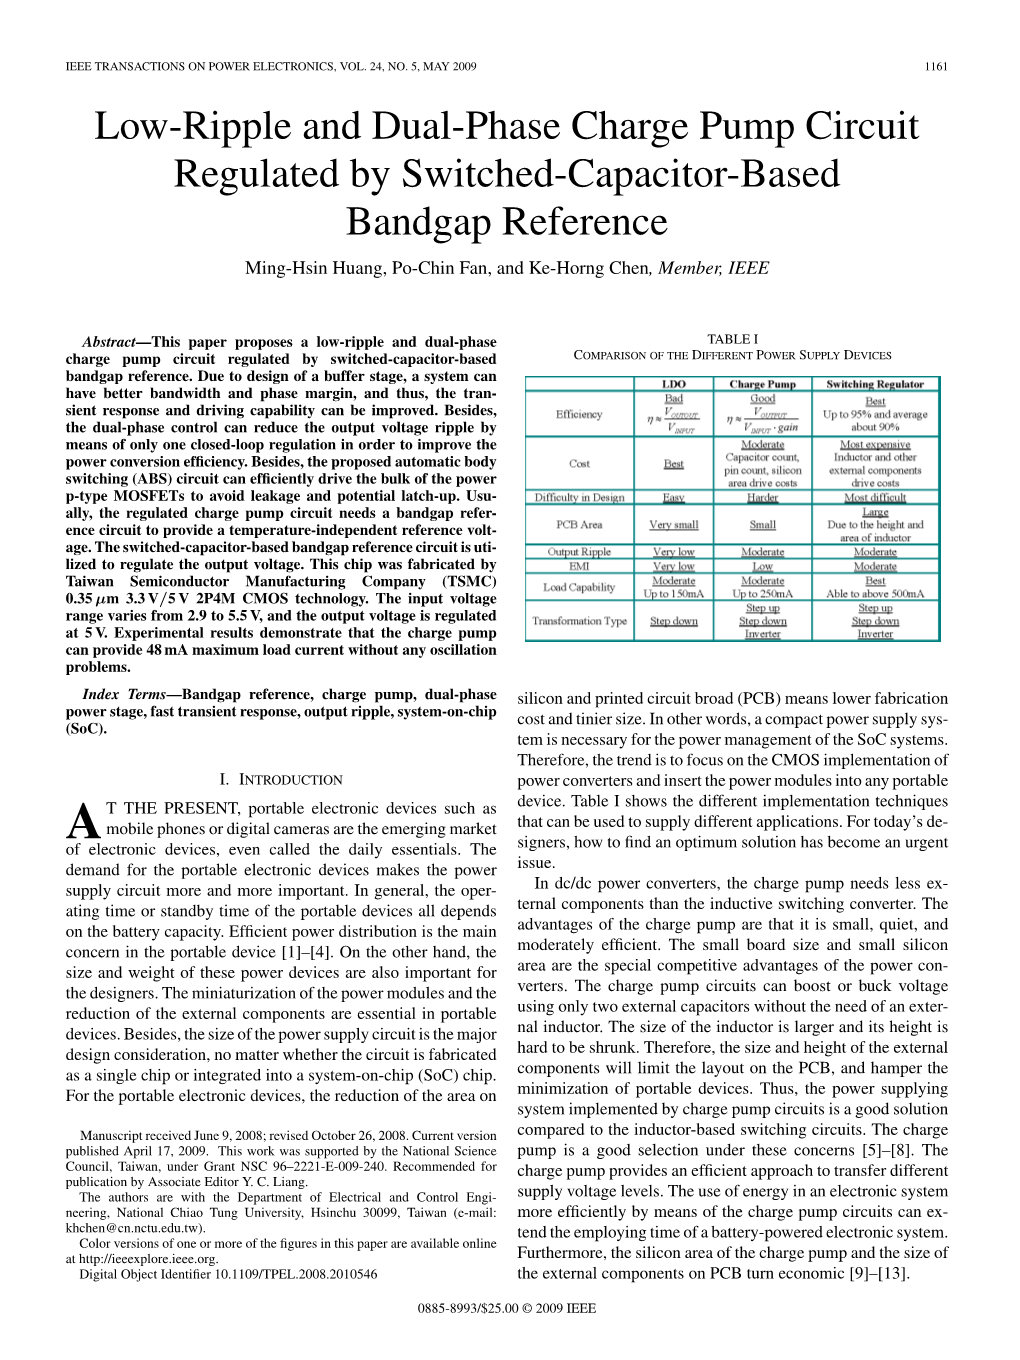 Low-Ripple and Dual-Phase Charge Pump Circuit Regulated by Switched-Capacitor-Based Bandgap Reference Ming-Hsin Huang, Po-Chin Fan, and Ke-Horng Chen, Member, IEEE